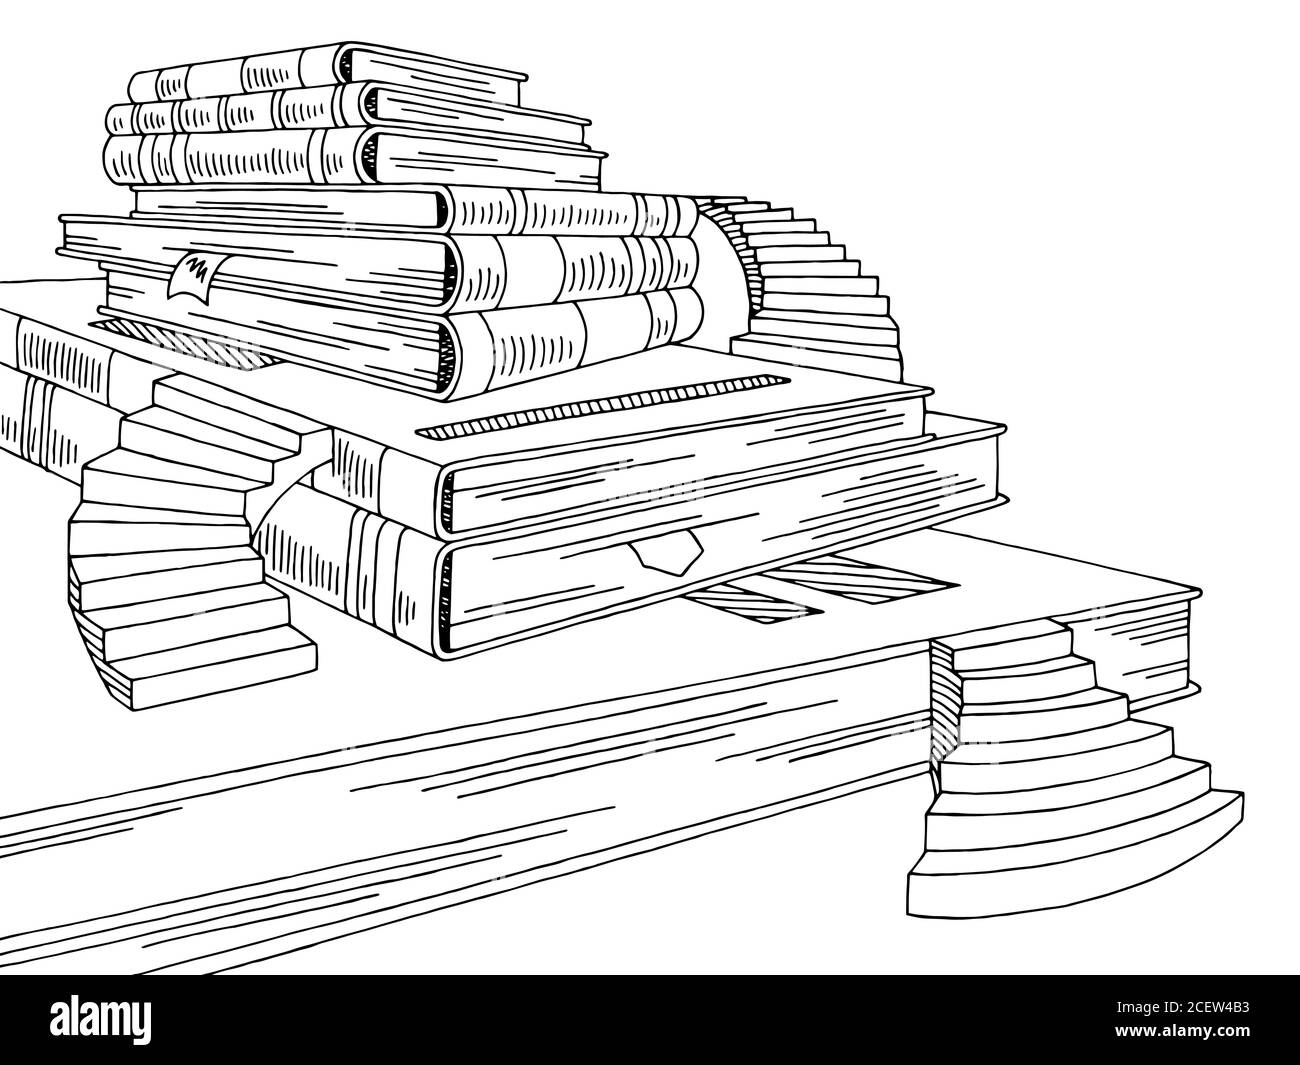 Books stairs graphic black white sketch illustration vector Stock Vector